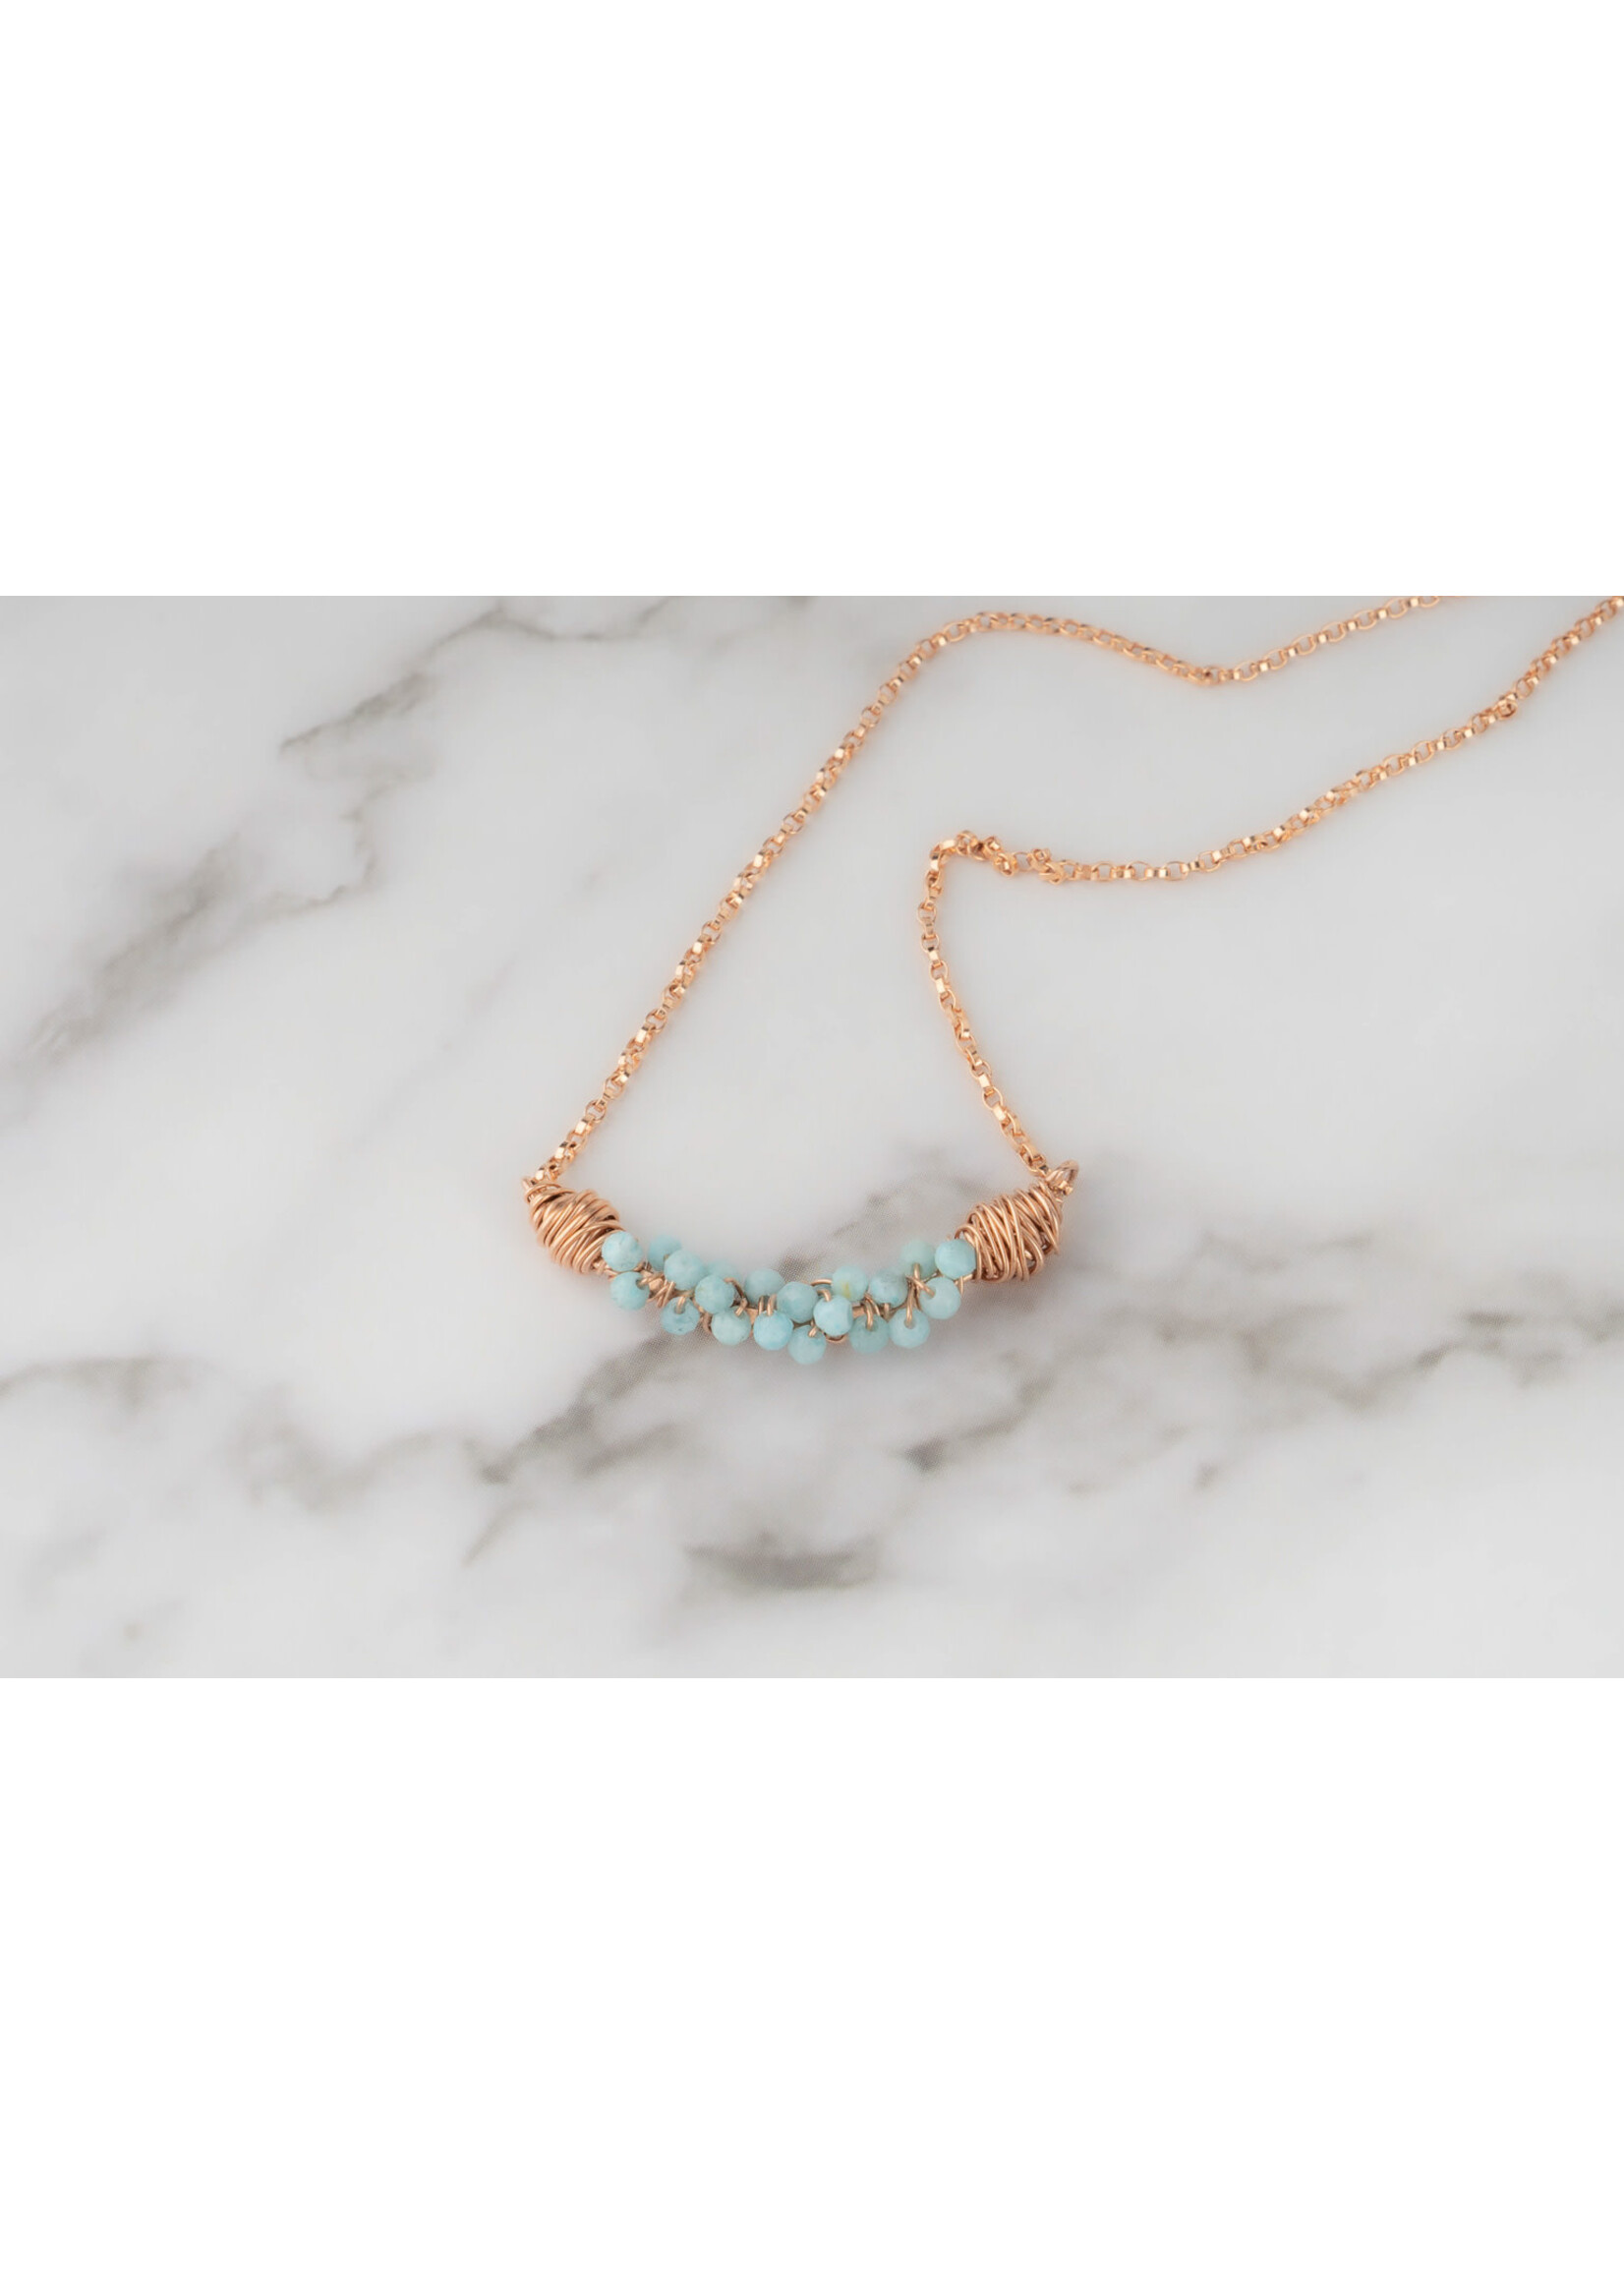 Cristy's Jewelry Designs Rose Gold Cluster Necklace-Larimar